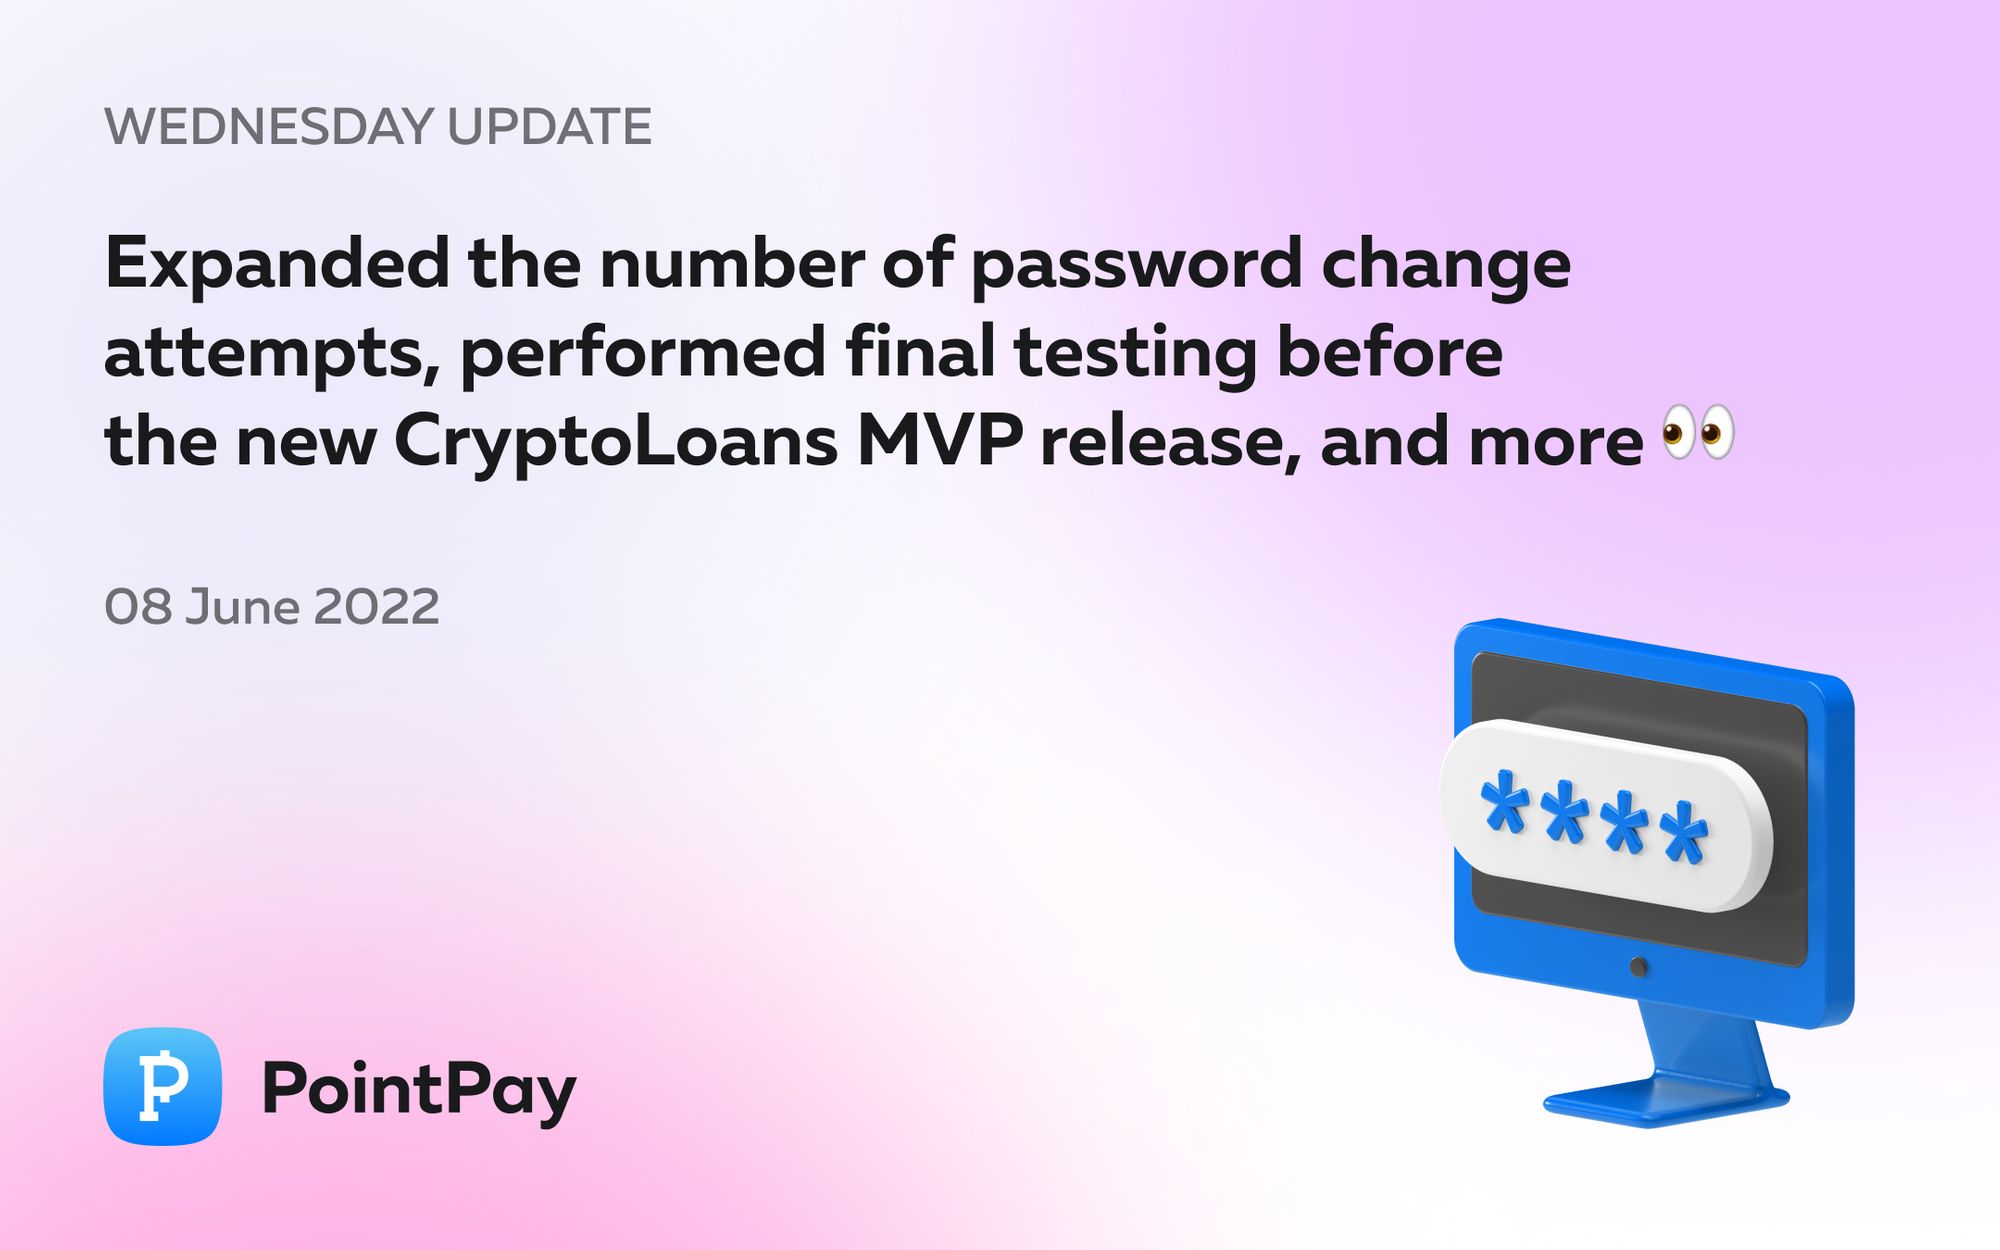 Wednesday update from PointPay